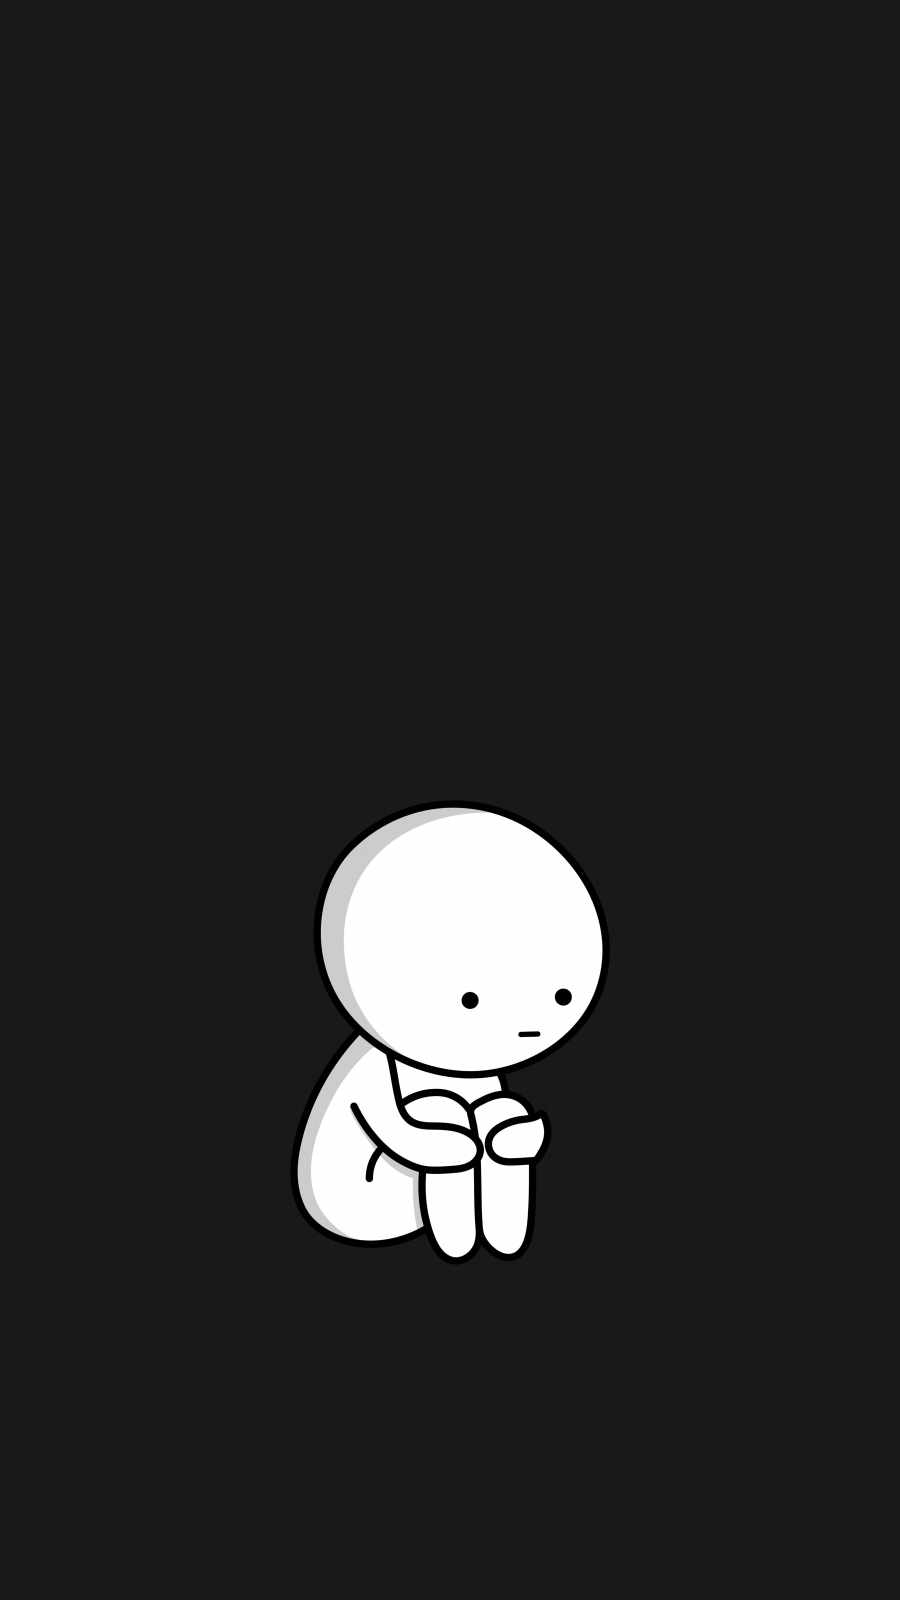 Sad Alone IPhone Wallpaper - IPhone Wallpapers : iPhone Wallpapers